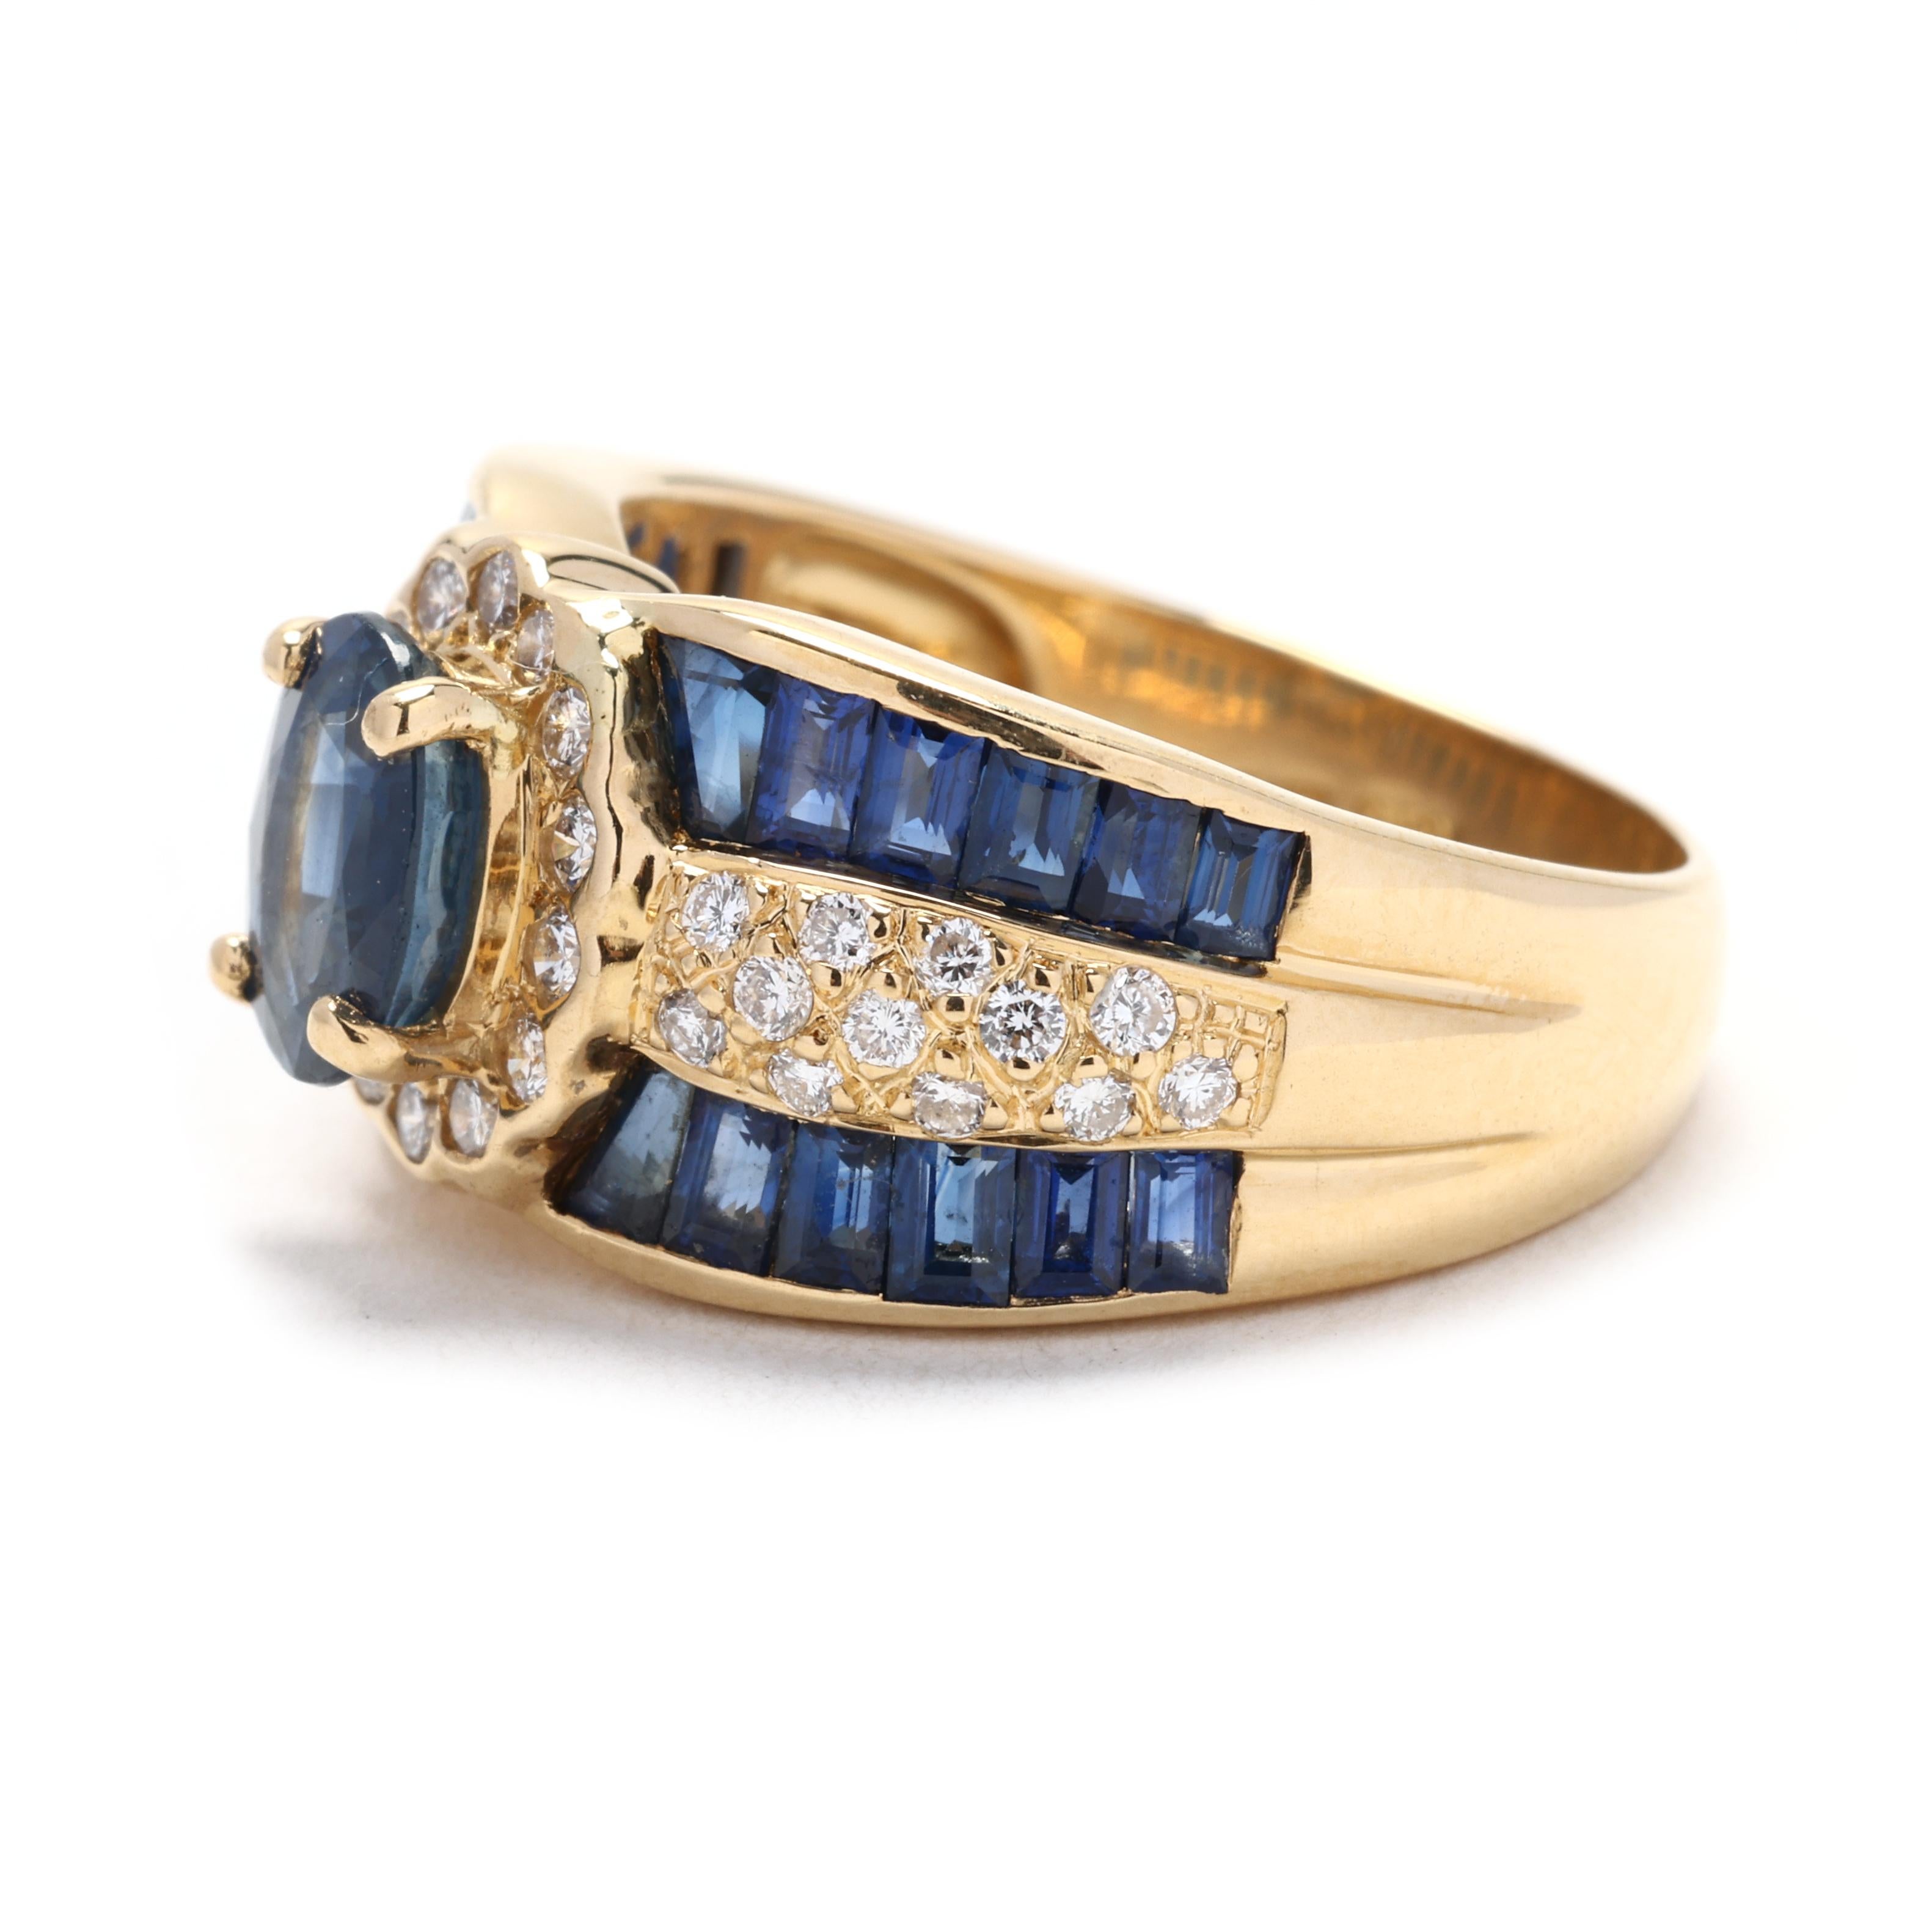 Multi Stone Sapphire and Diamond Cocktail Ring, 14K Yellow Gold, Ring Size 6 In Good Condition For Sale In McLeansville, NC